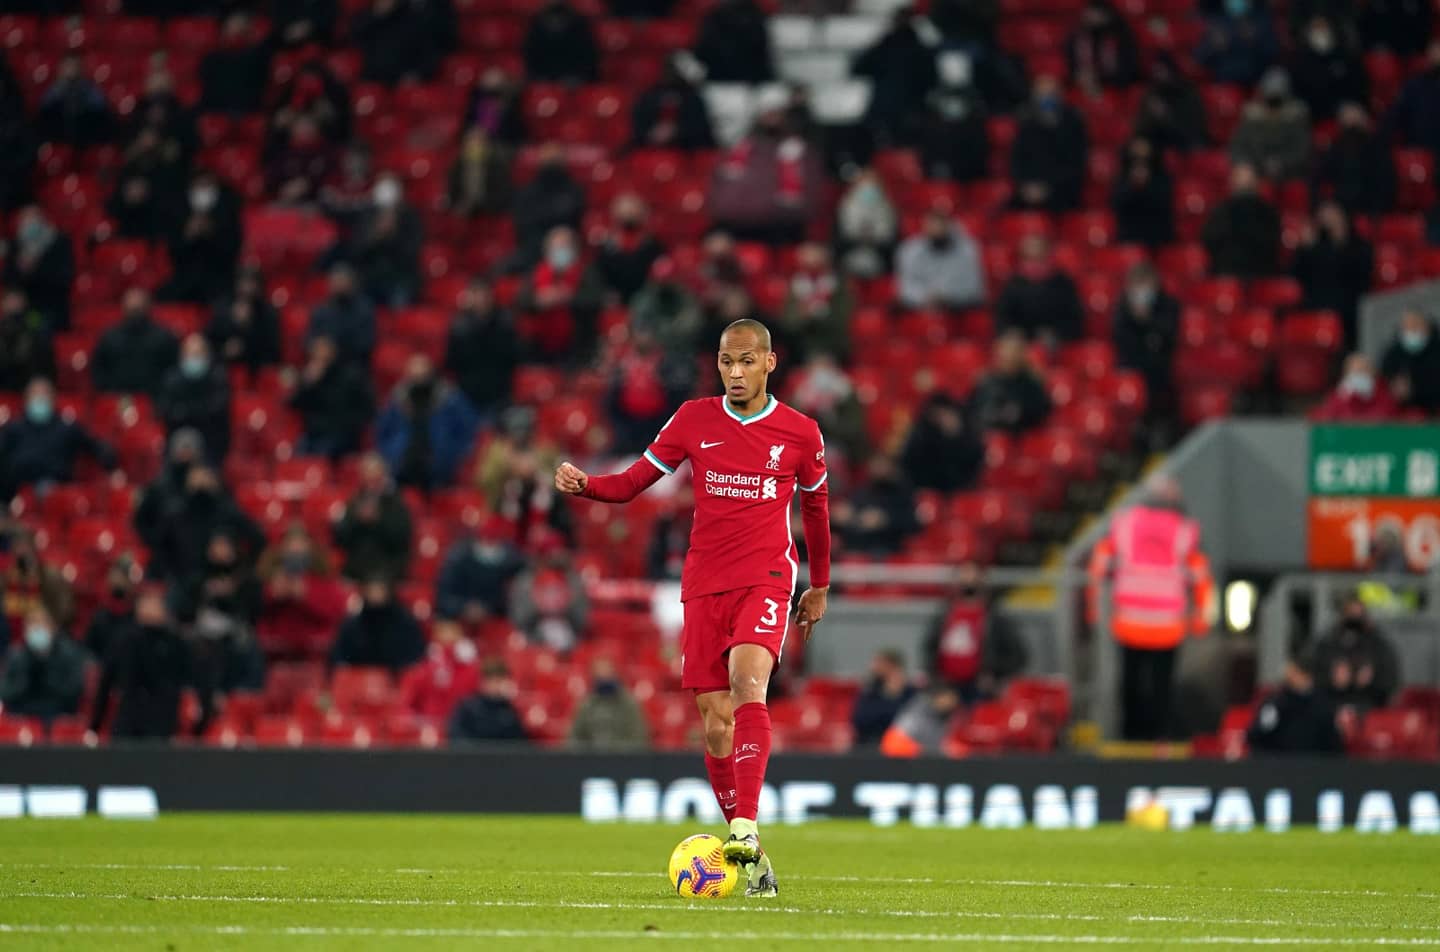 Fabinho is an exceptional player and doesn't need public praise, insists Jurgen Klopp